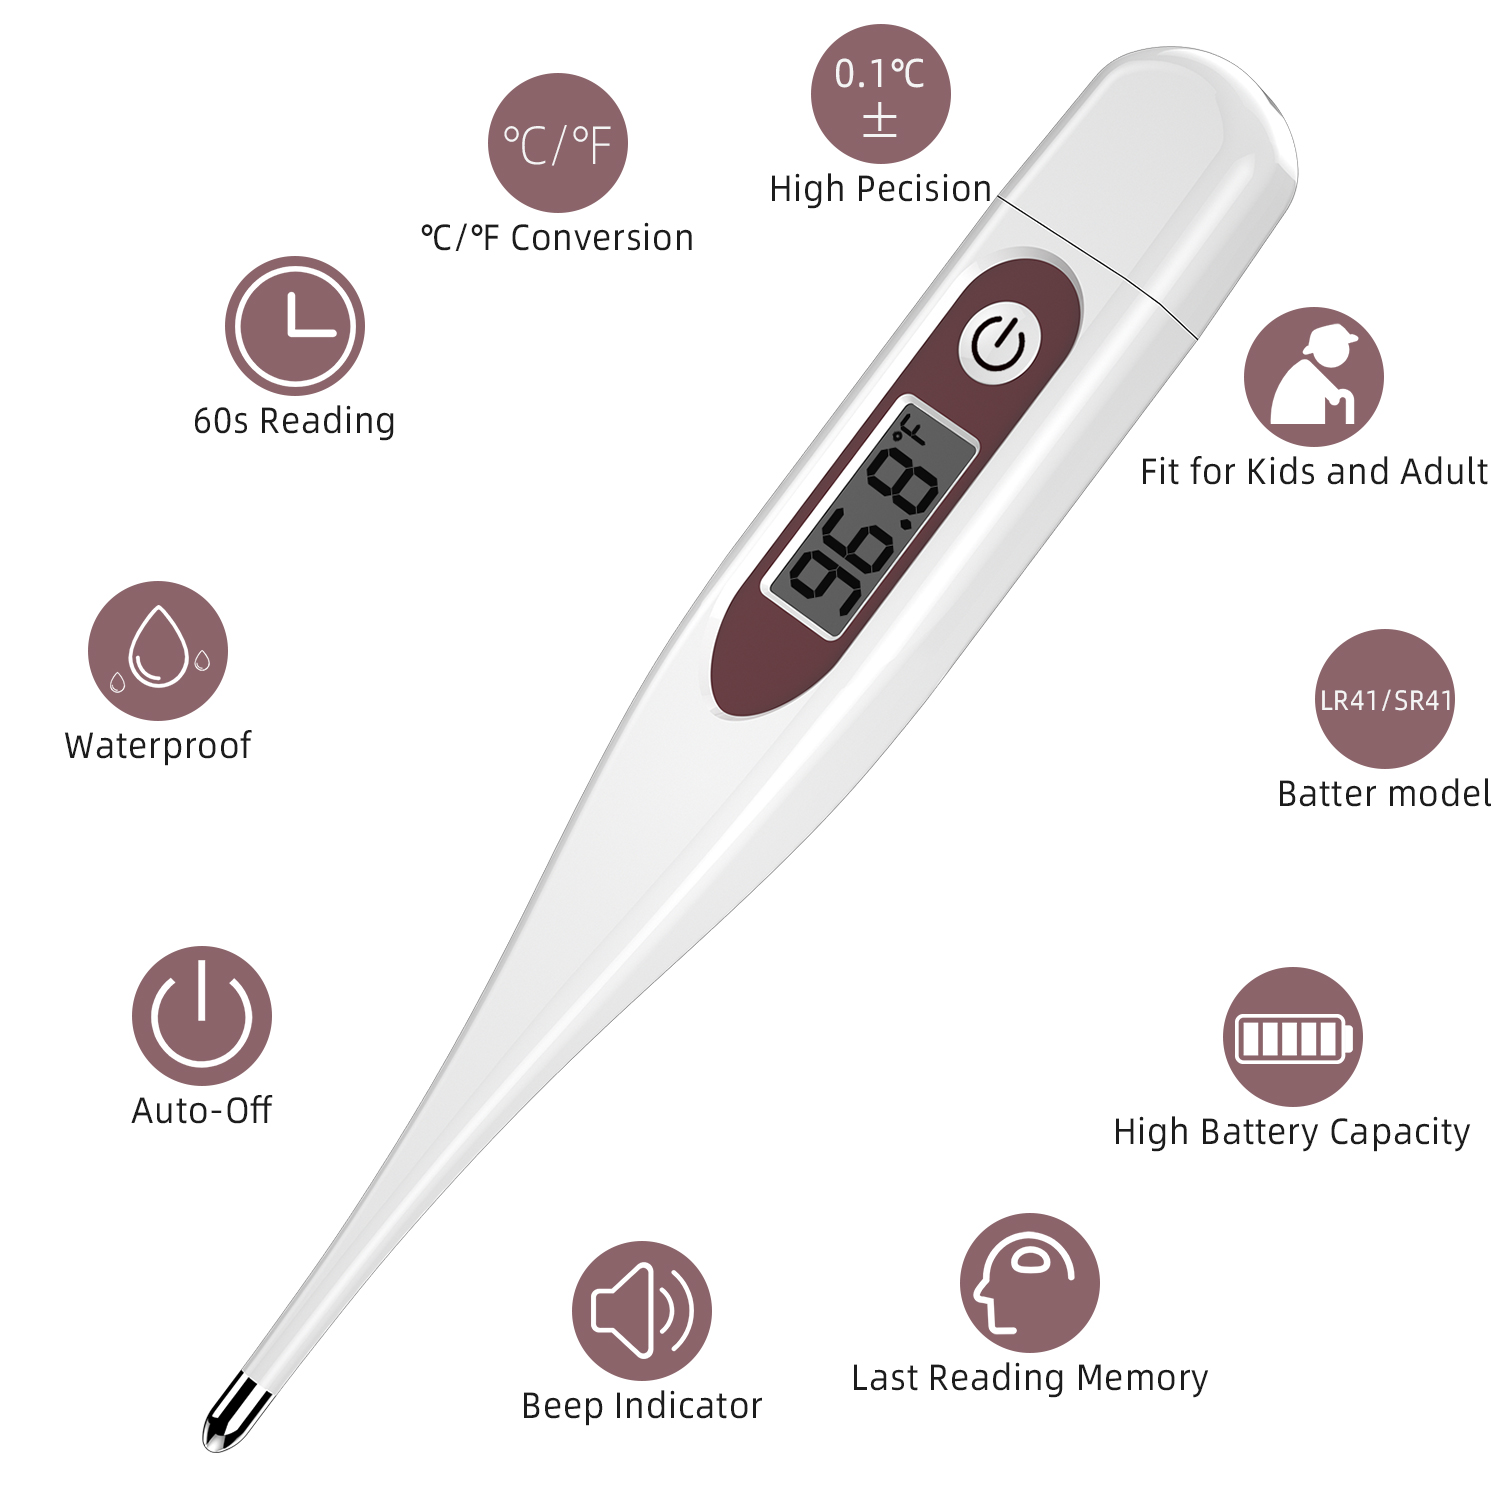 CKeep Digital Thermometer Kid & Adult, Body Thermometer with High Accuracy, Switchable and Fever Indicator - image 5 of 6